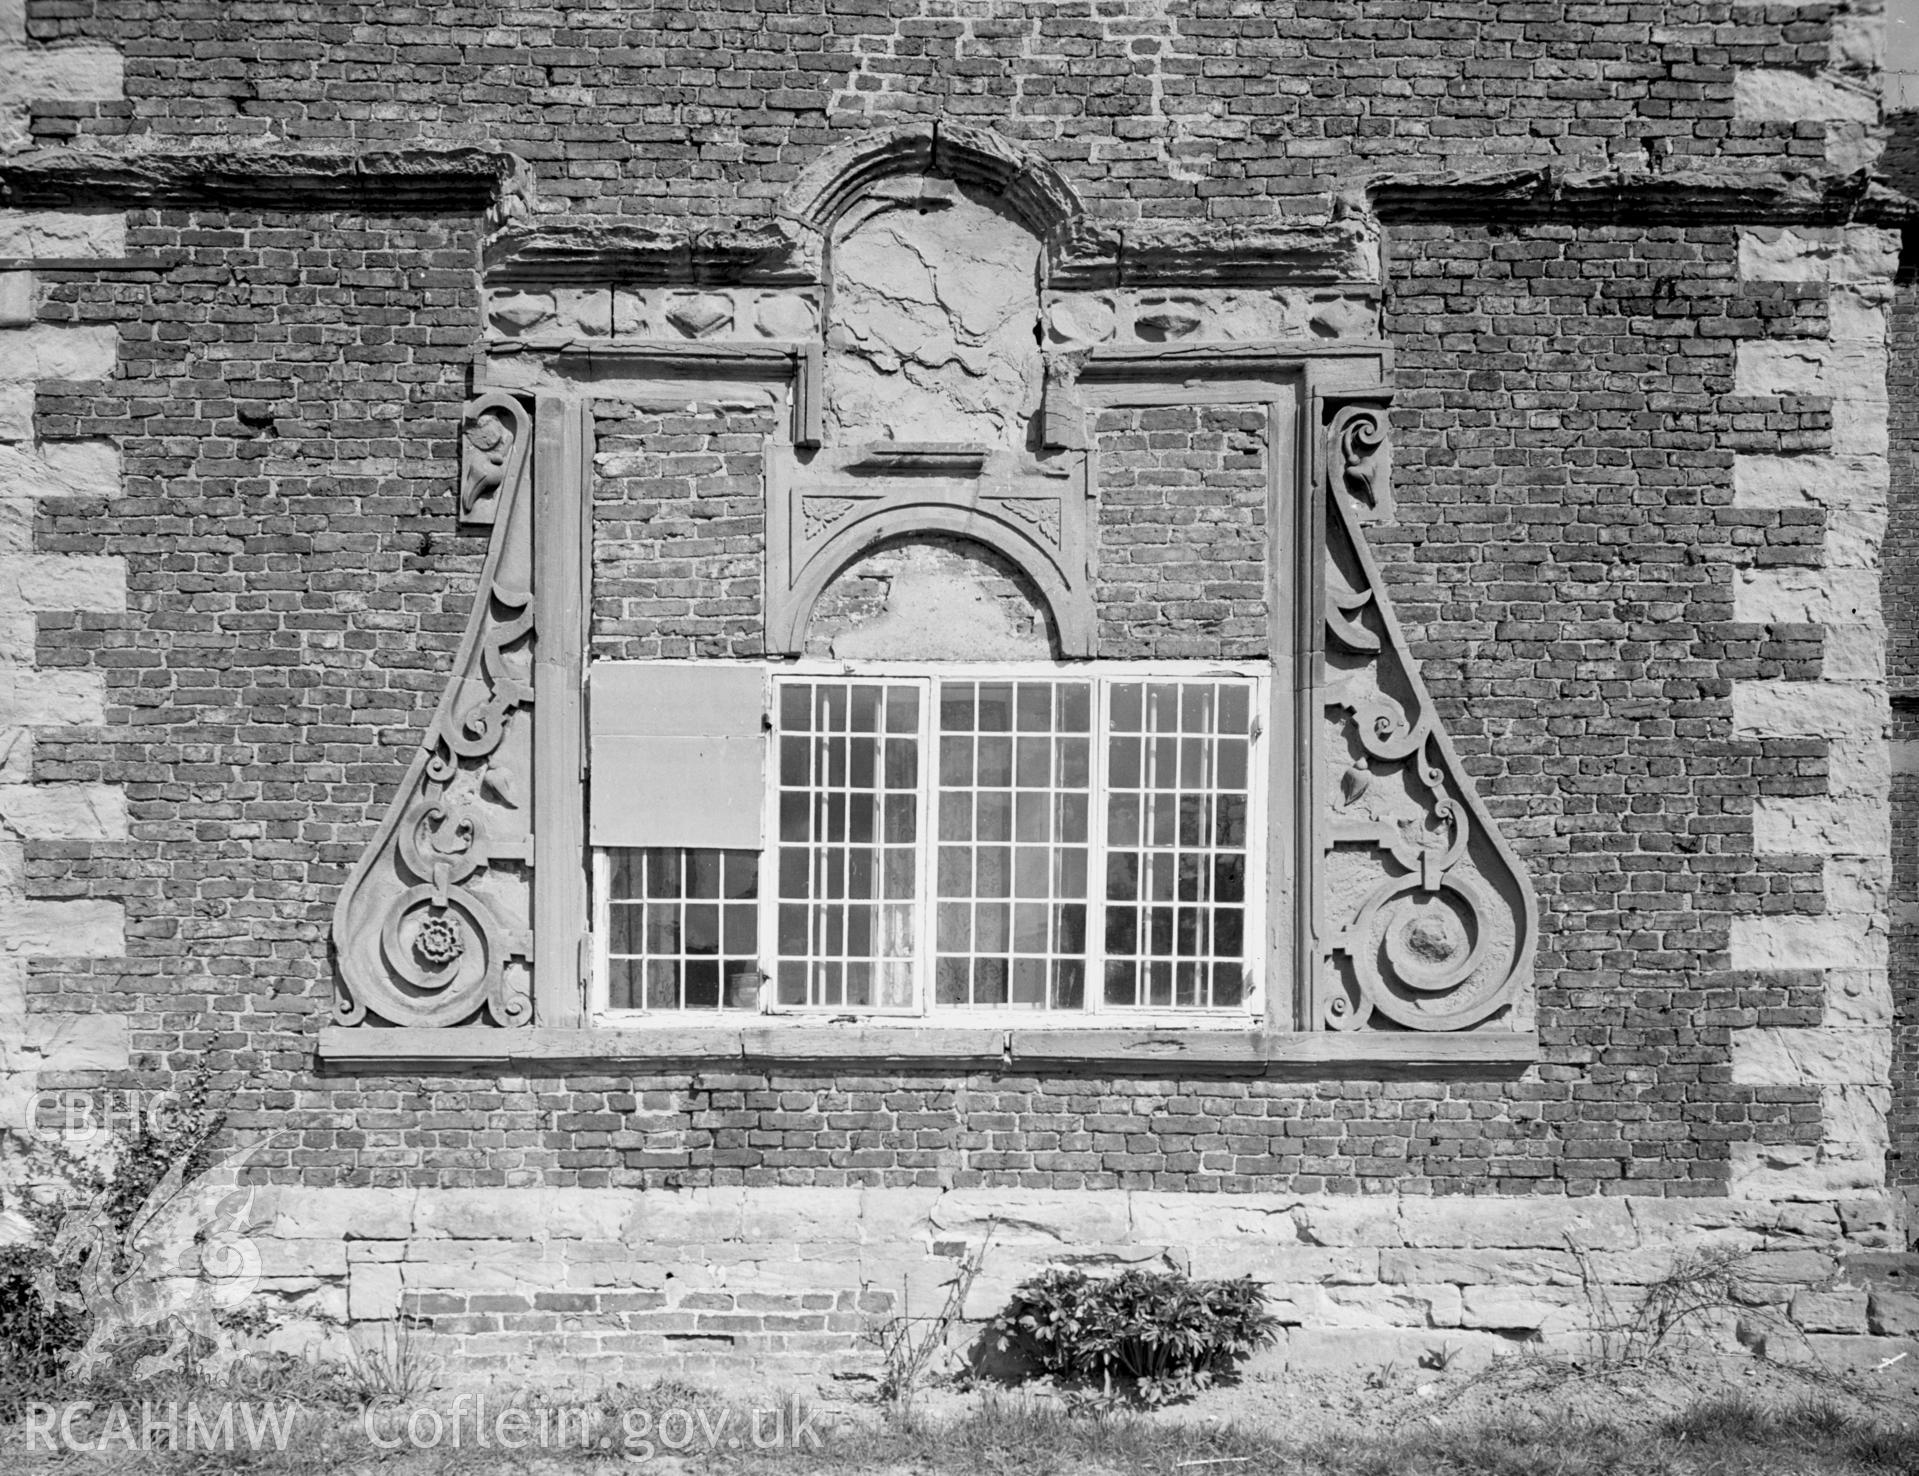 A view of the ground floor, gable projected, scroll-ornamented window (south wing).